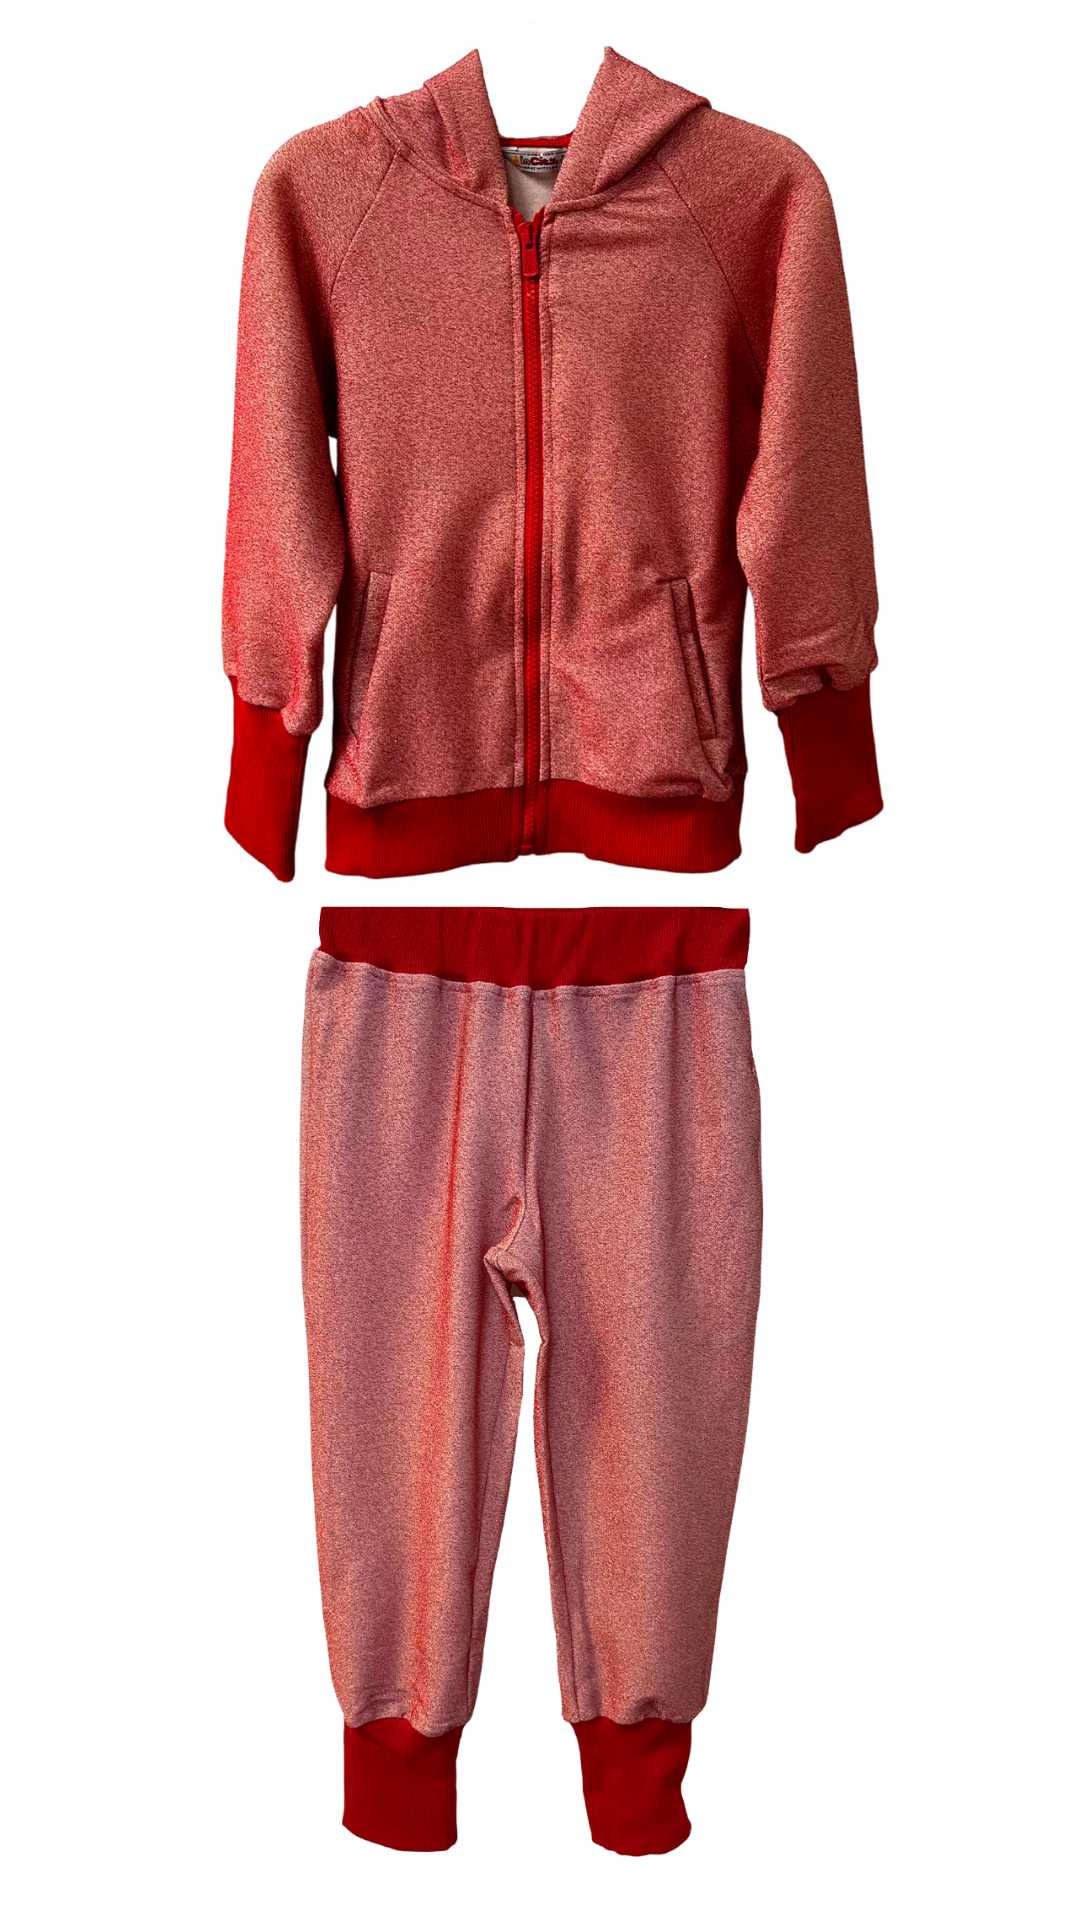 InCity Girls Toddler Tween 1-14 Years Regular Fit Red Active Full Zip Jacket and Jogger Sweatpants 2 piece Fashion Christmas Tracksuit Set InCity Boys Girls